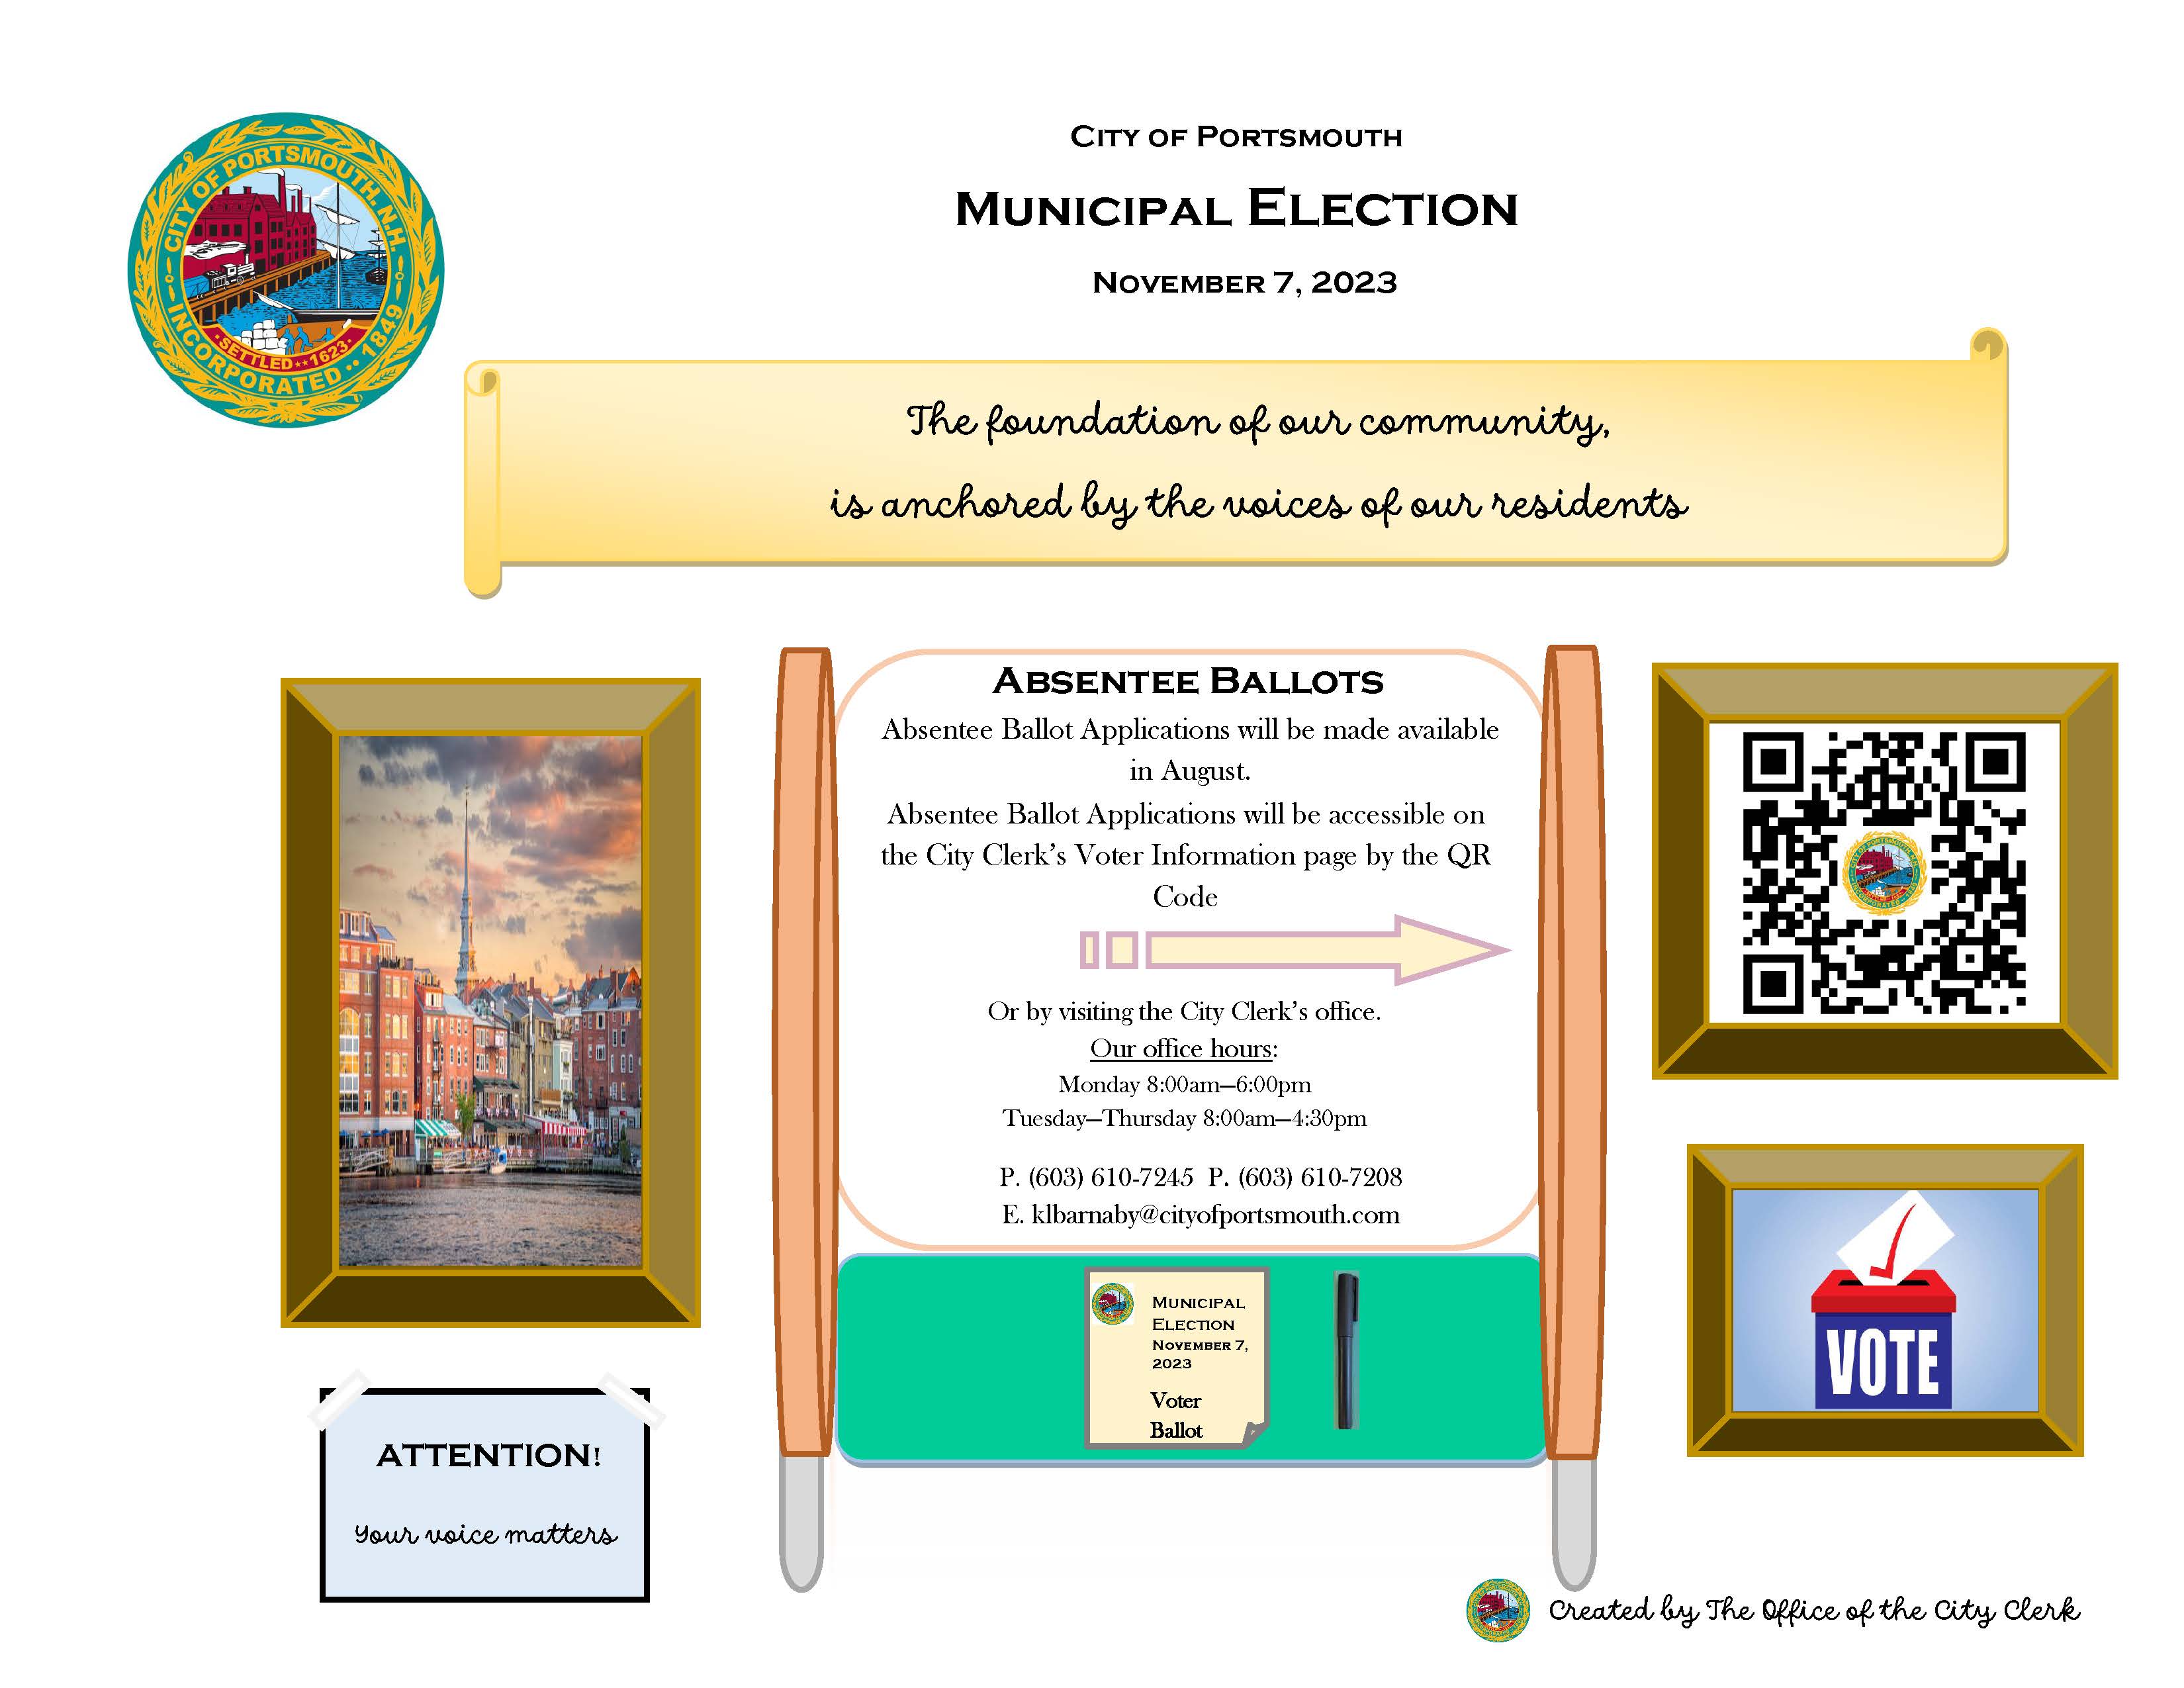 Student Guide to Municipal Election